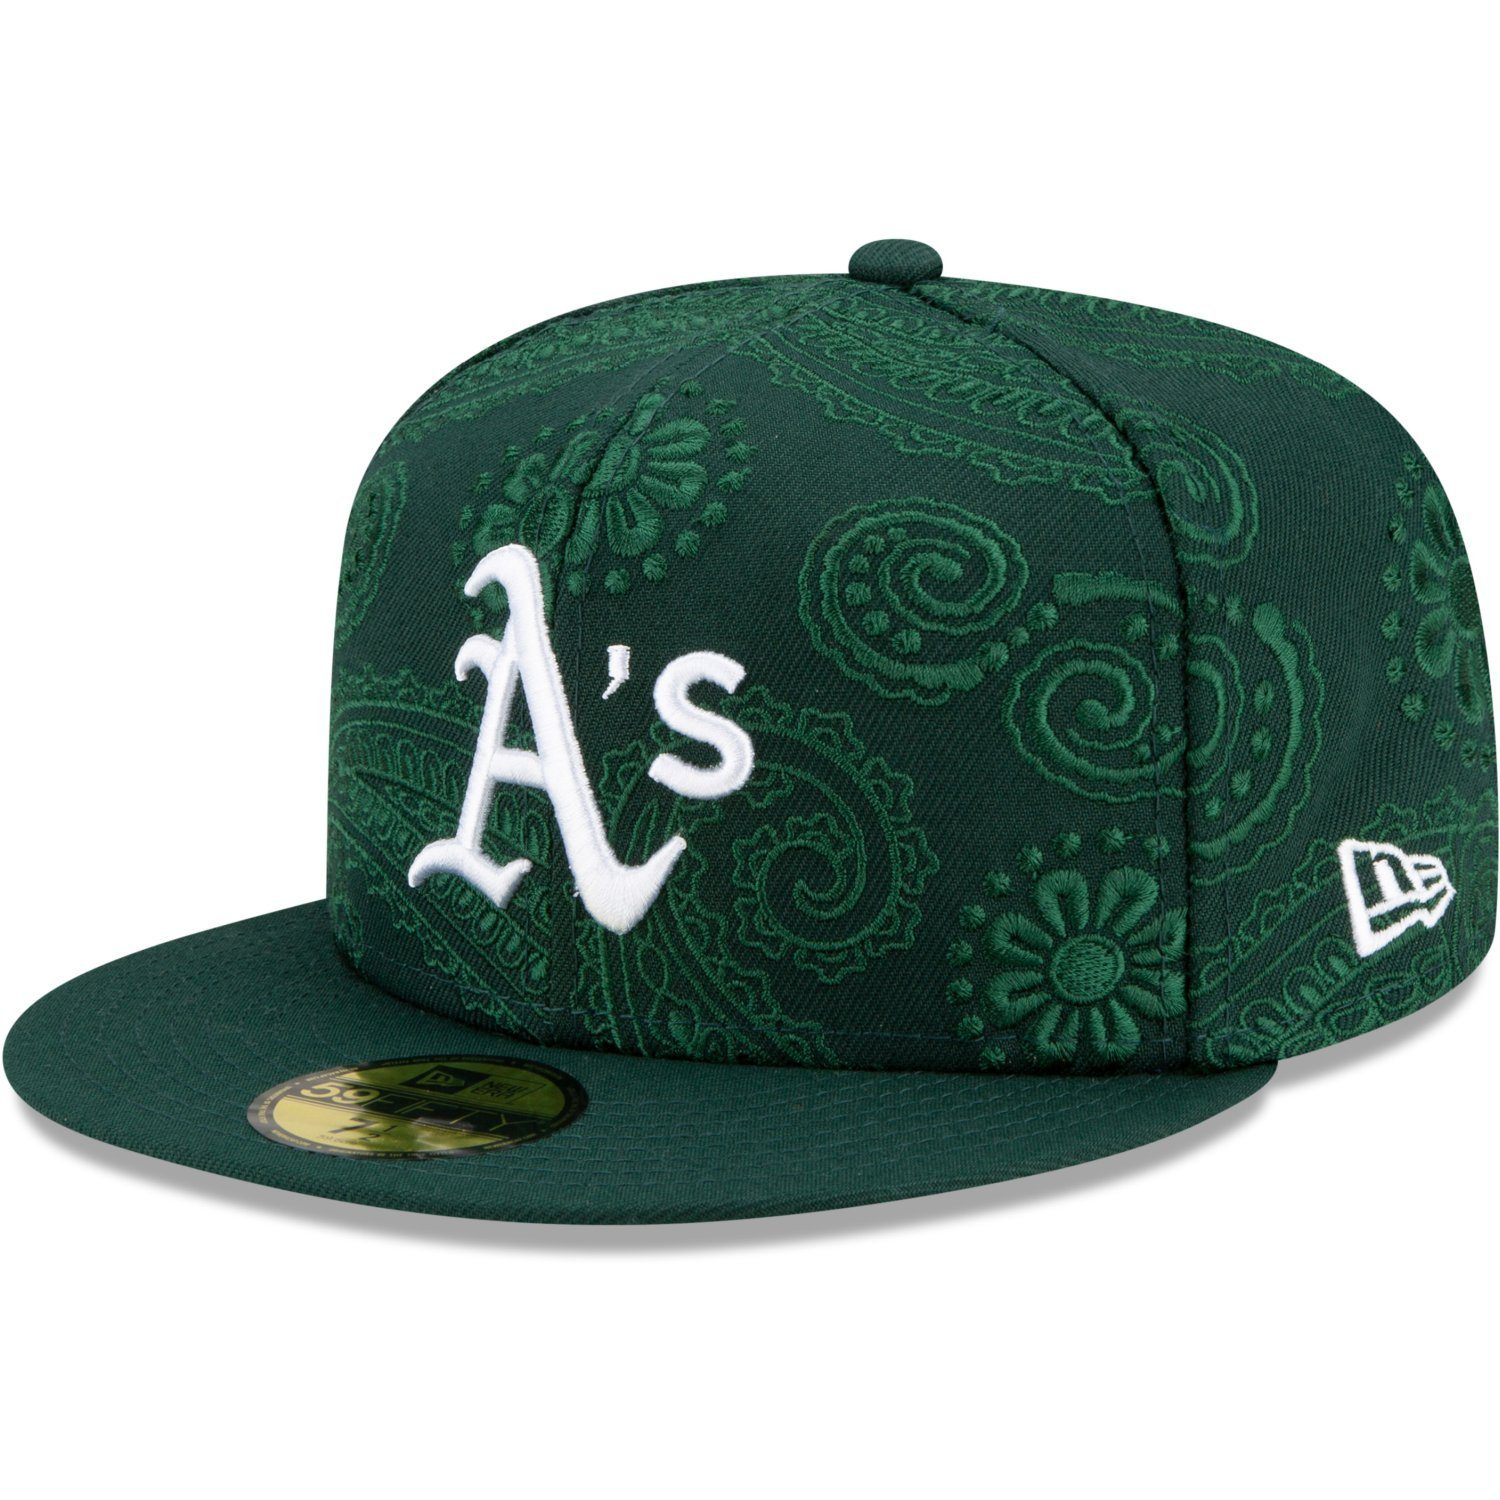 New Era Fitted Cap 59Fifty SWIRL PAISLEY Oakland Athletics